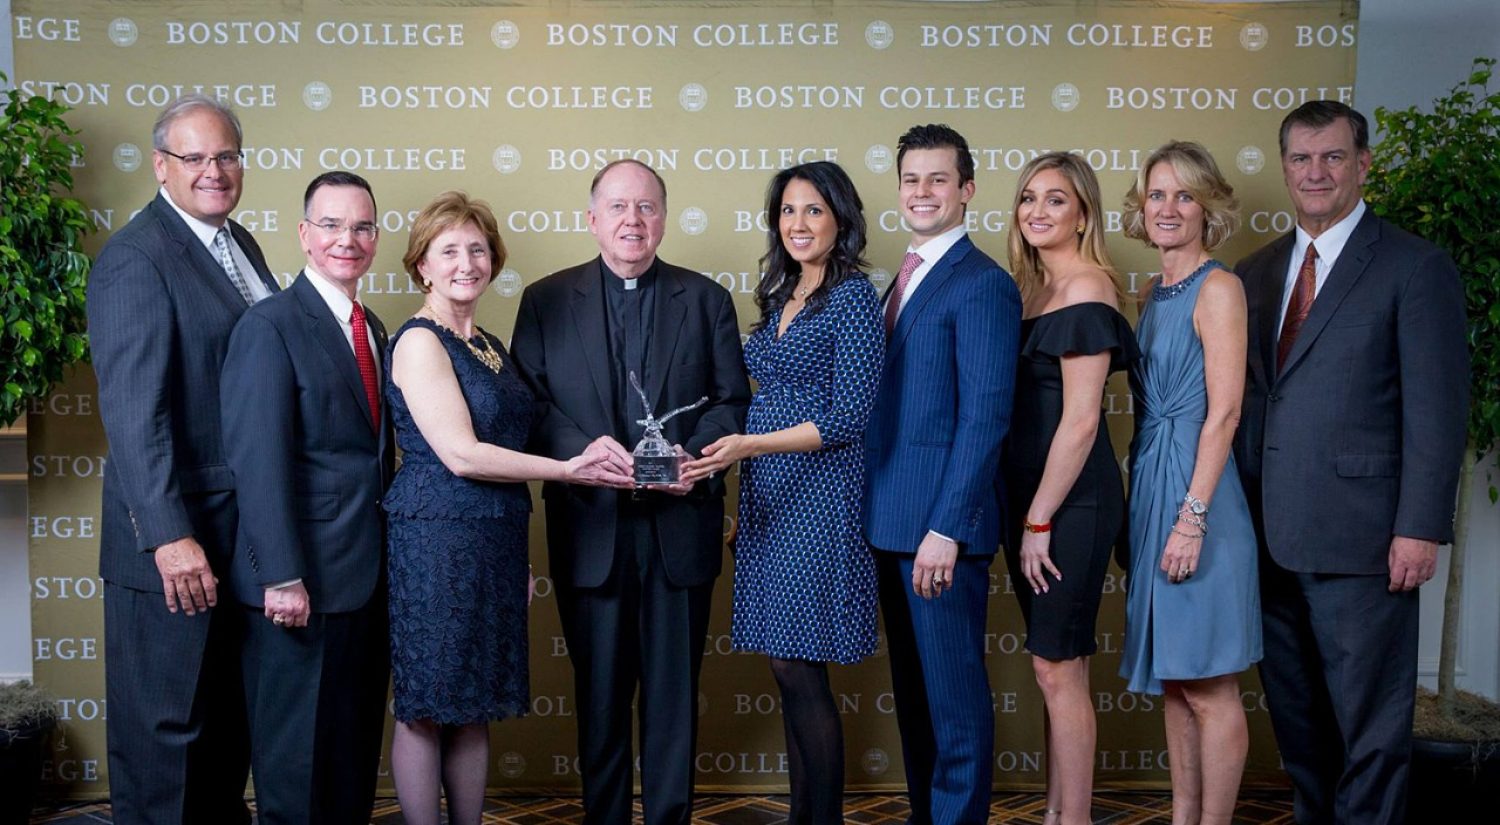 2017 Distinguished Alumni Award recipients with University President William P. Leahy, S.J. 